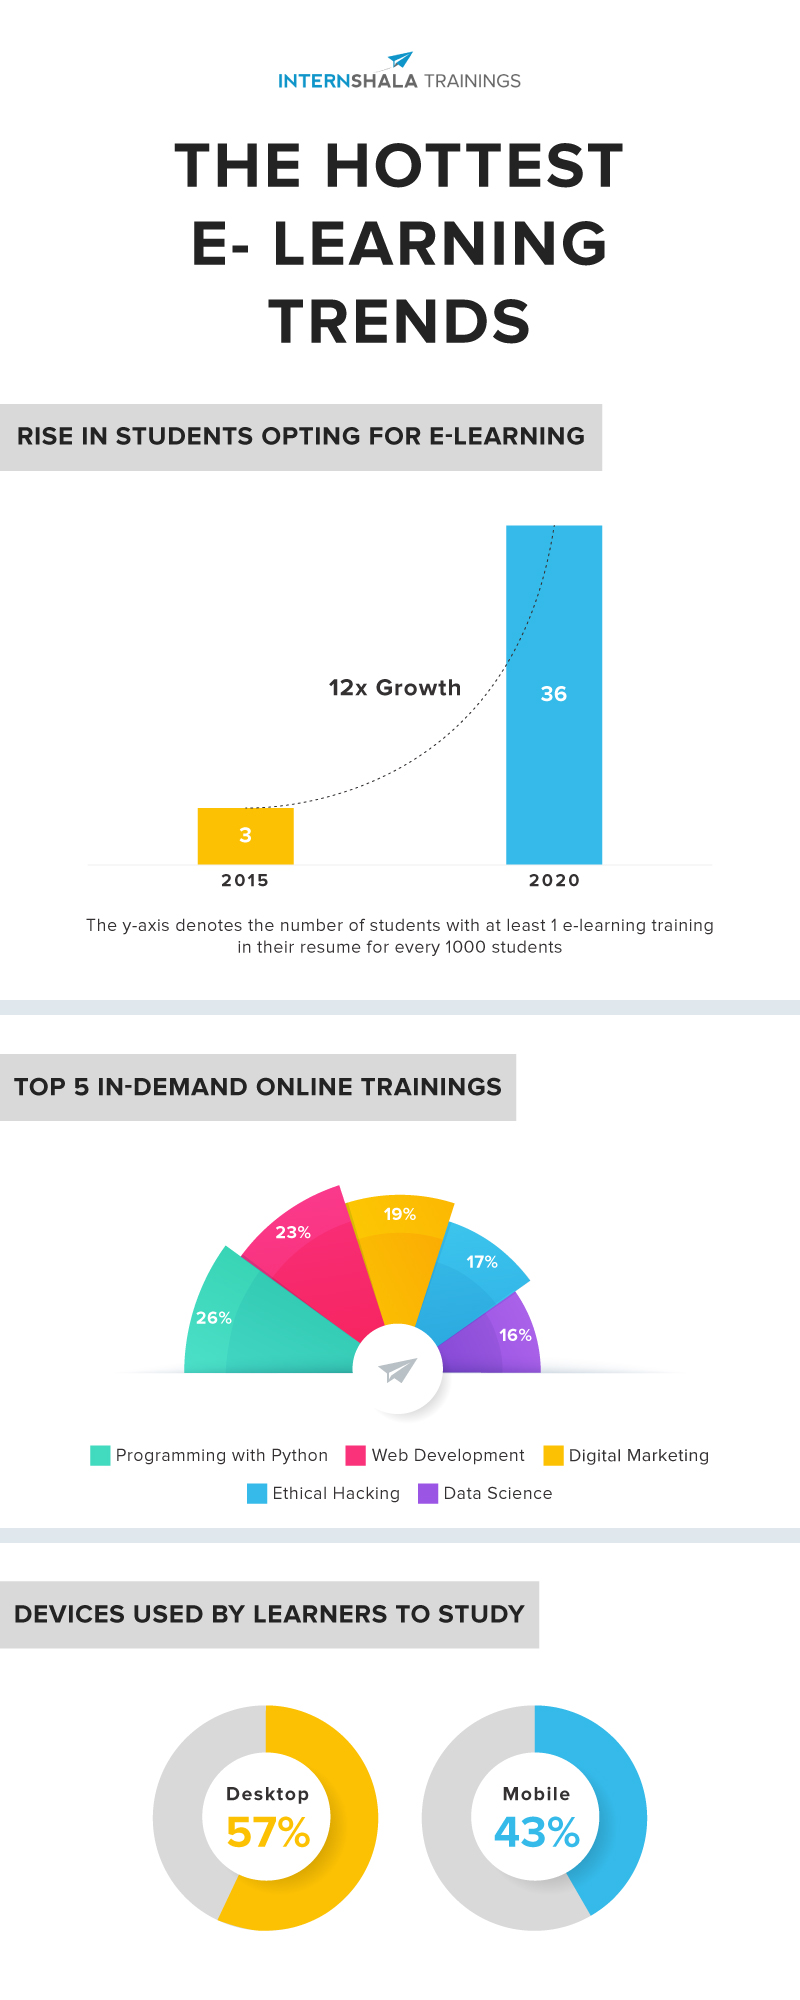 Most popular e-learning trends